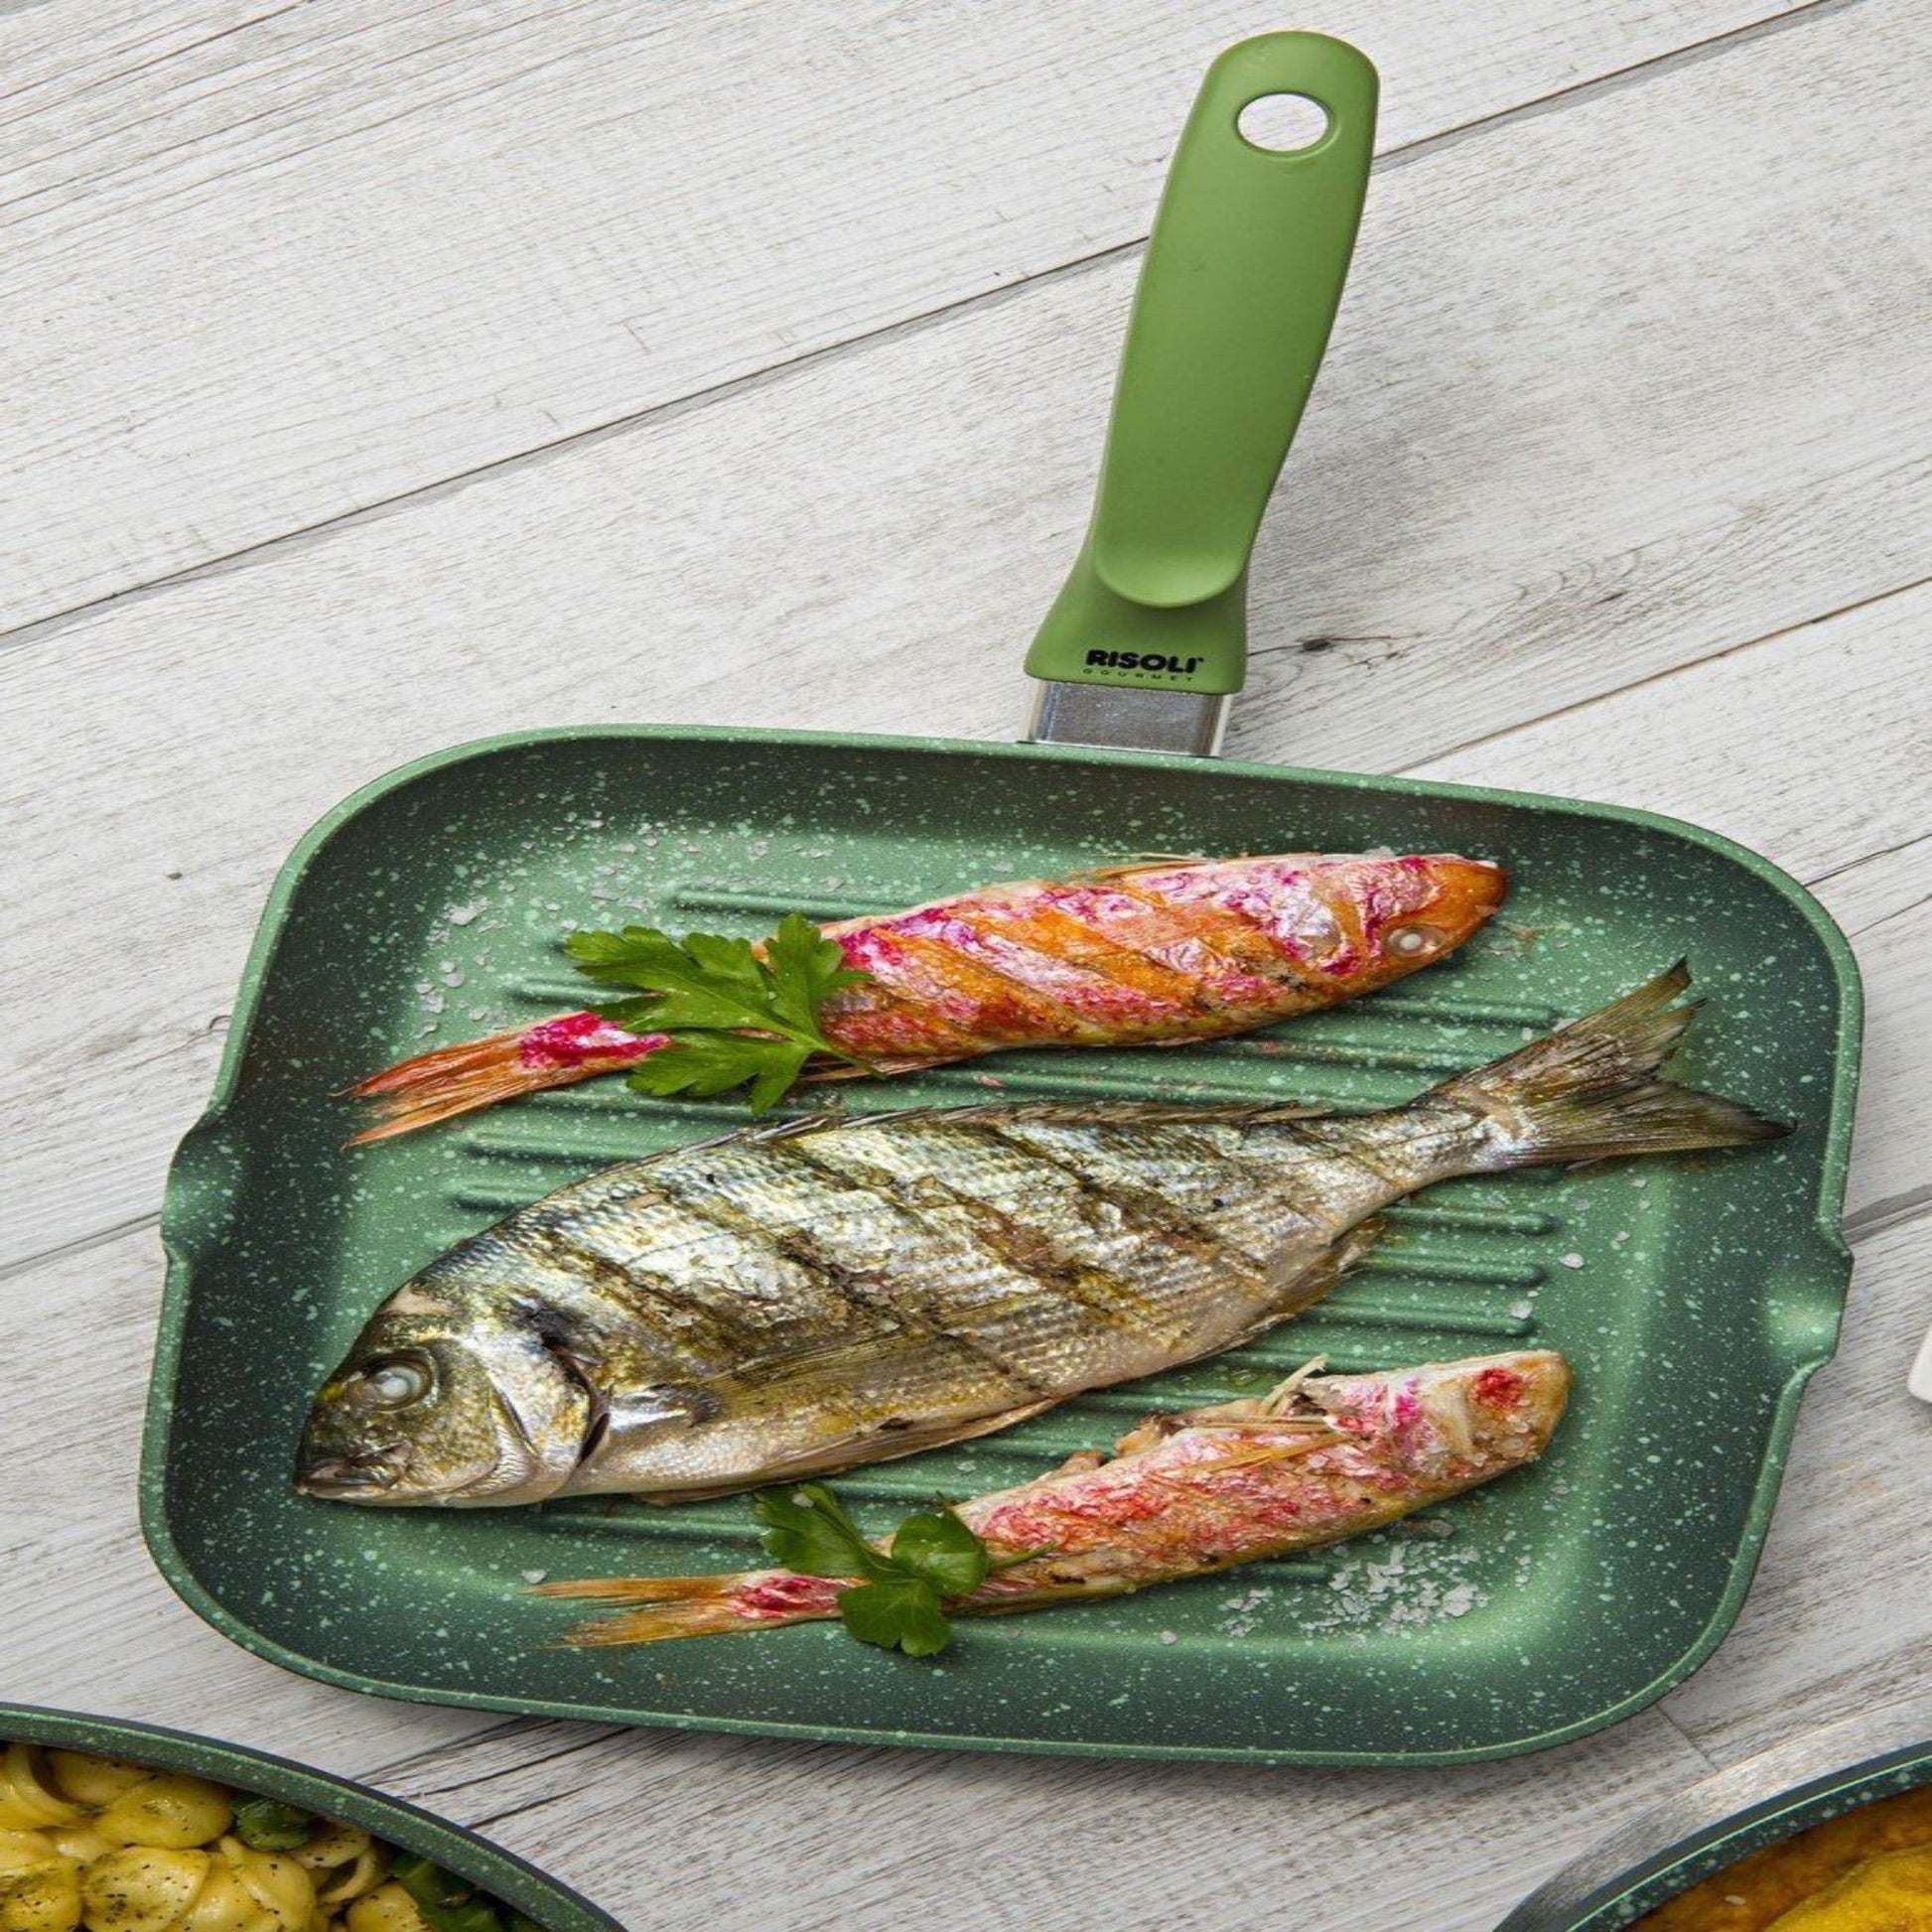 Risoli Dr. Green Grill with Handle 26 x 26 cm - Green - 44000344